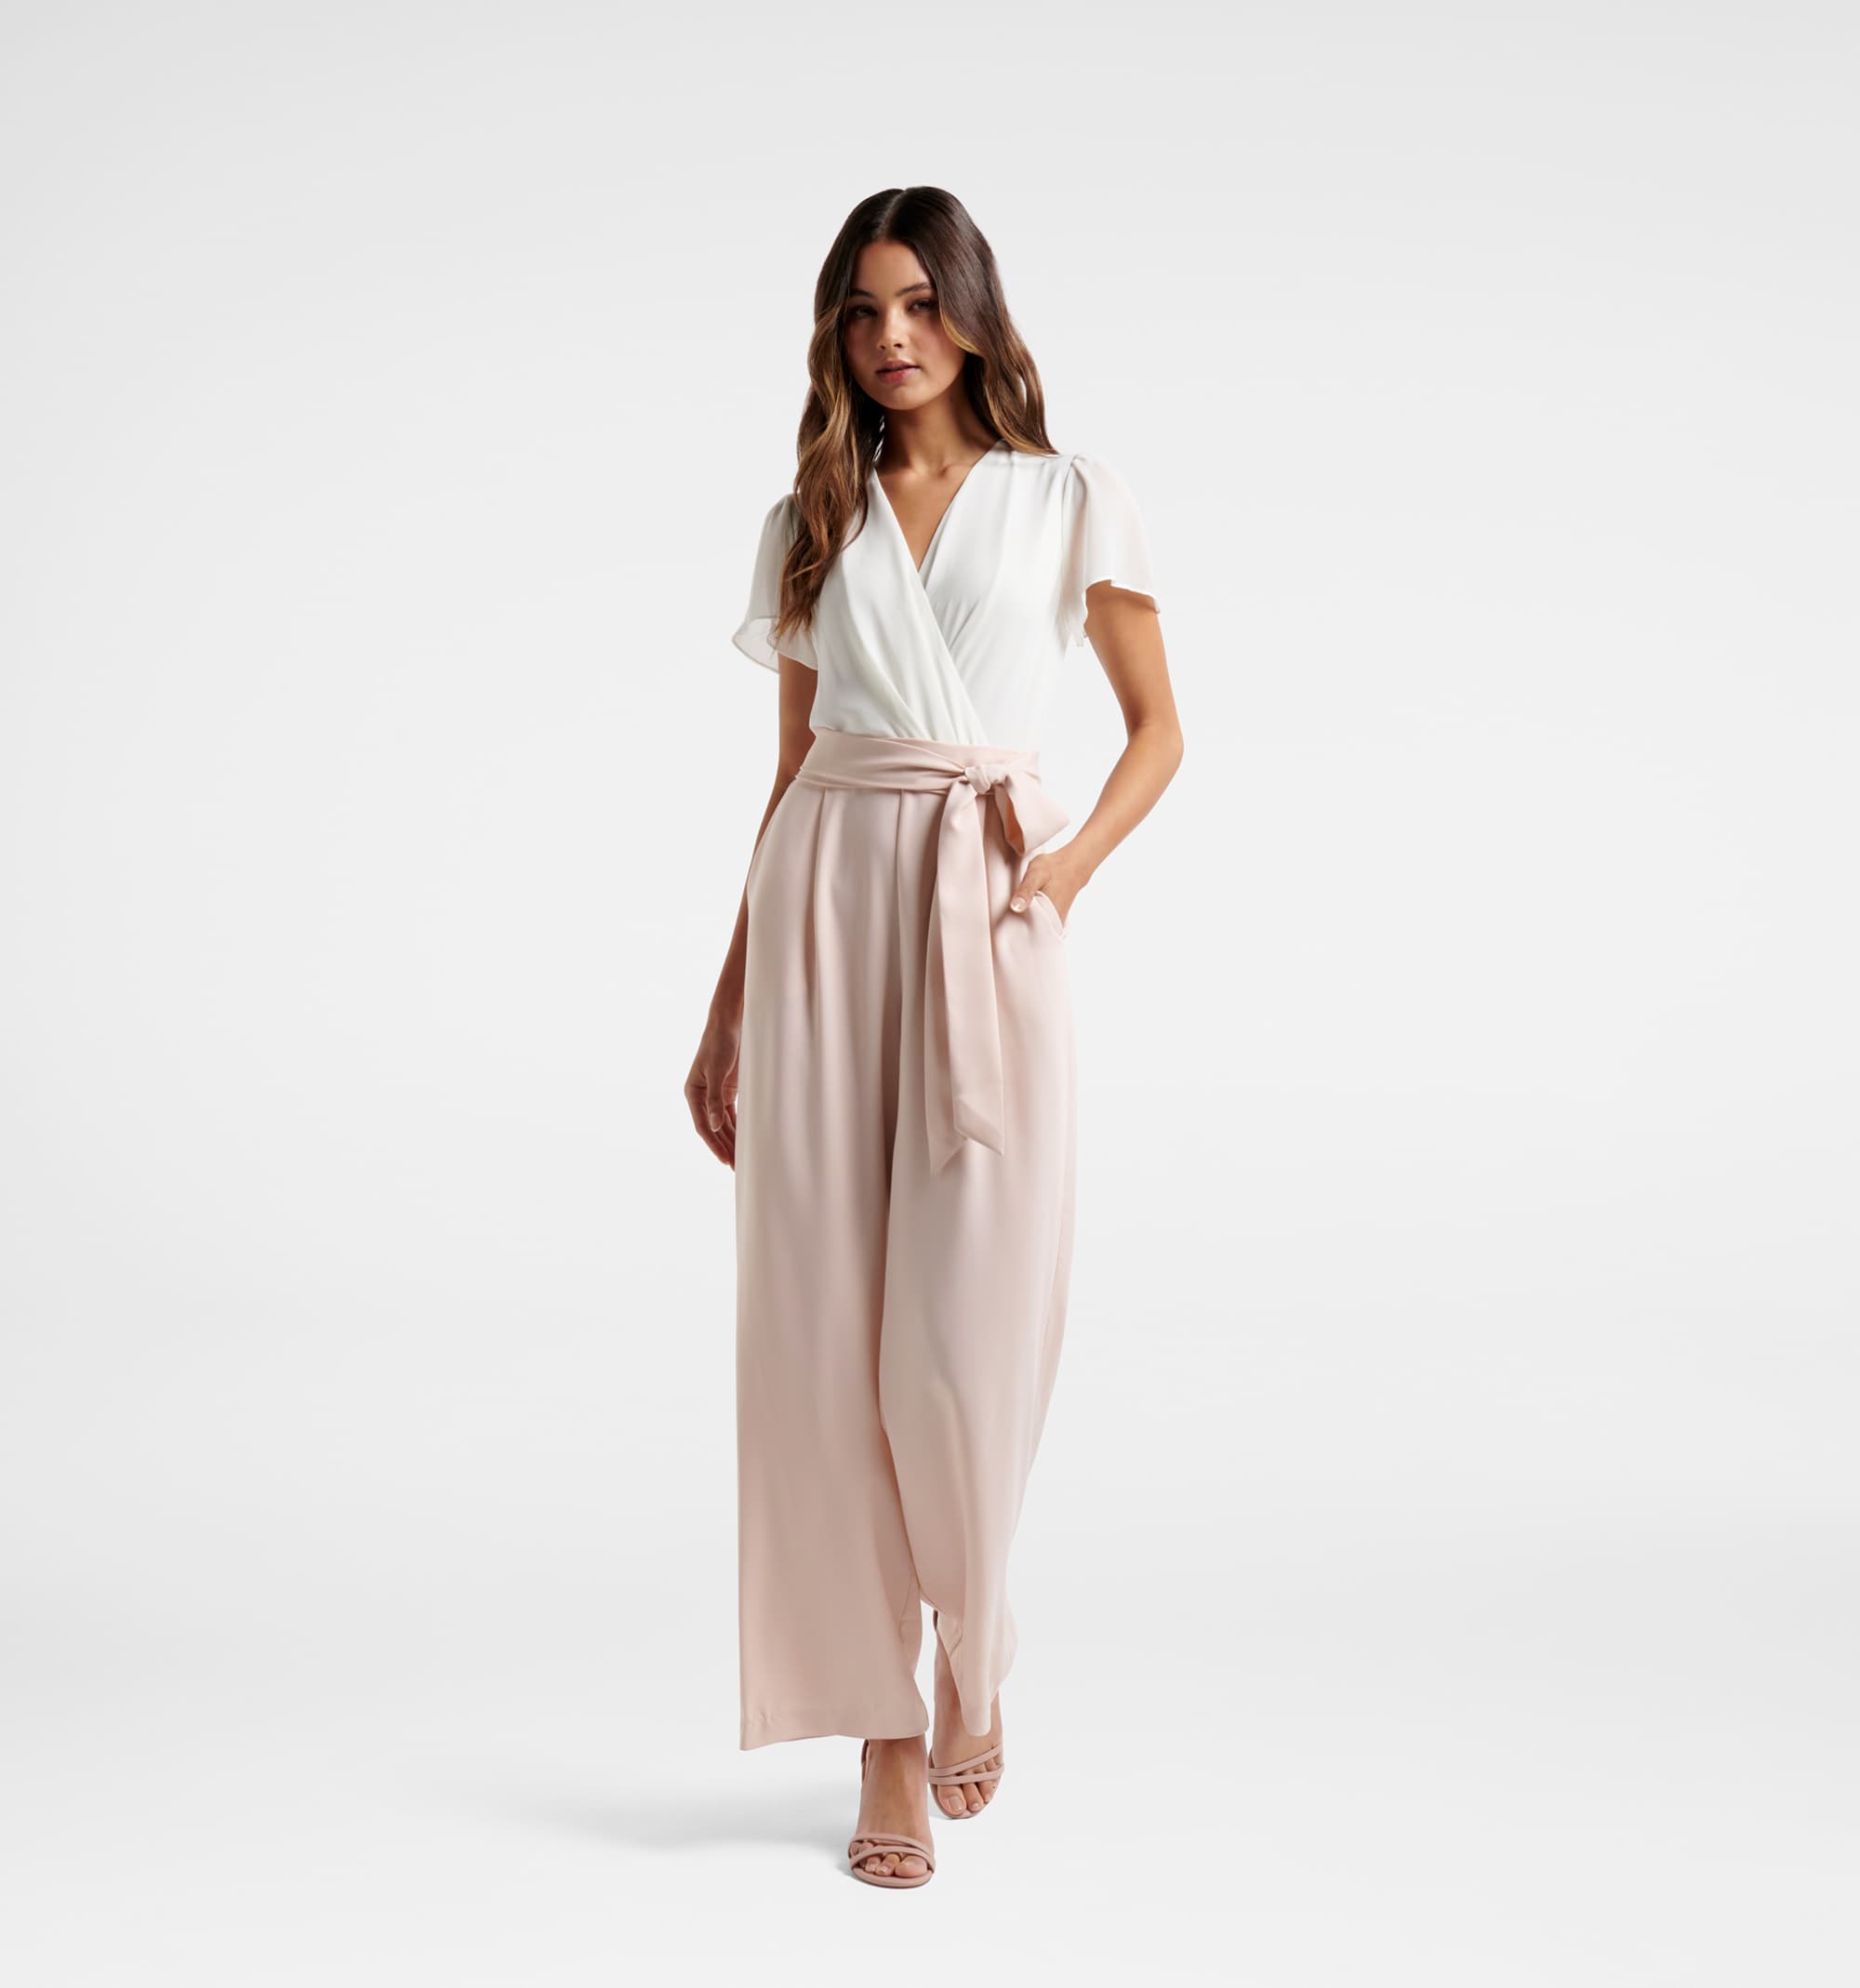 Shop Forever New Women's Cotton Jumpsuits up to 70% Off | DealDoodle